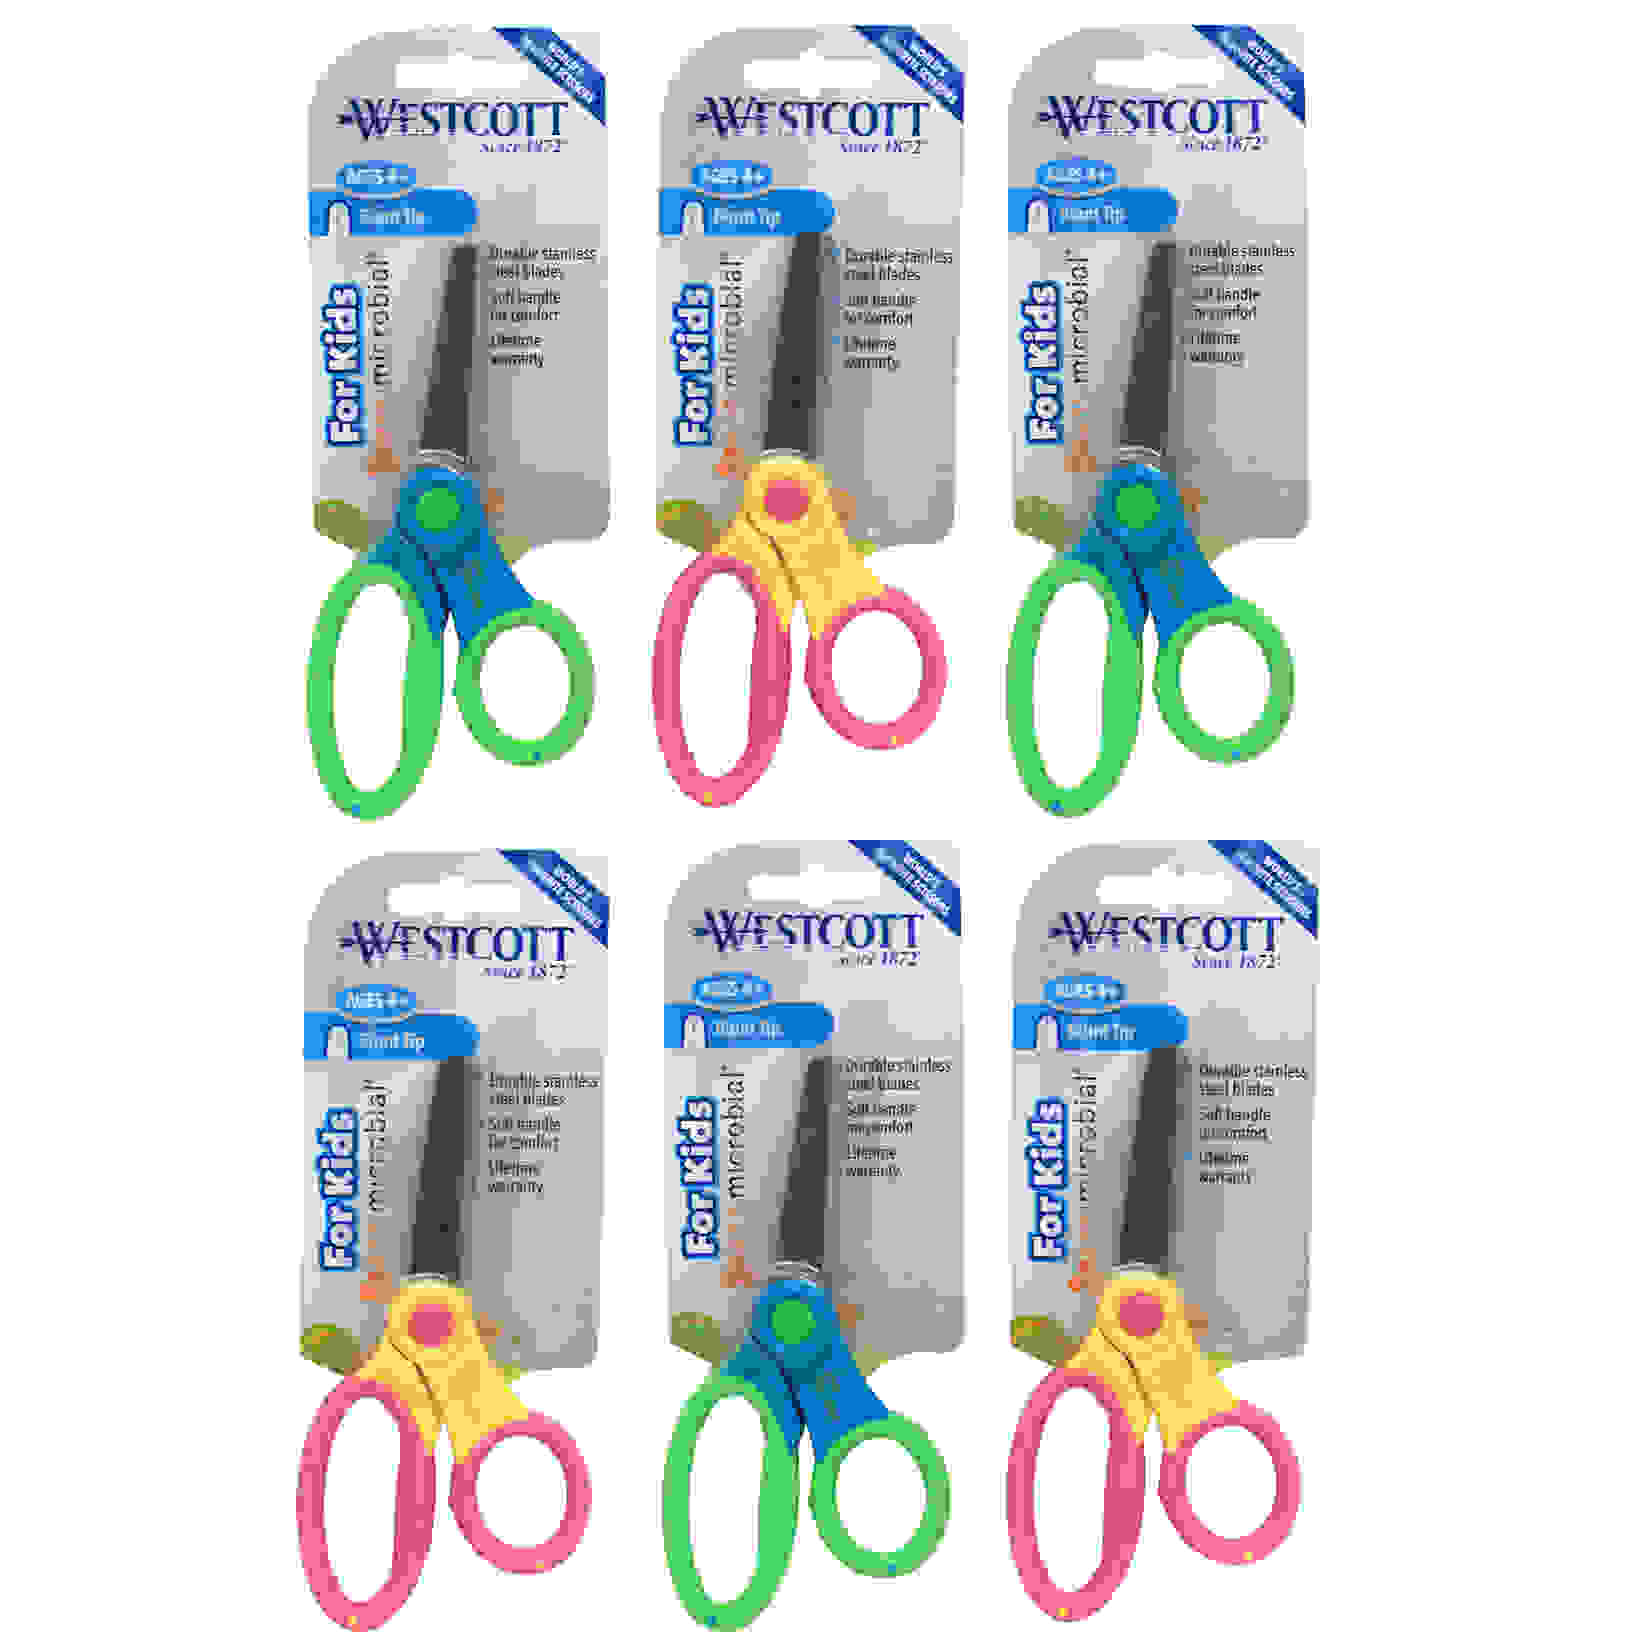 Kids 5" Scissors with Anti-Microbial Protection, Blunt, Colors Vary, Pack of 6